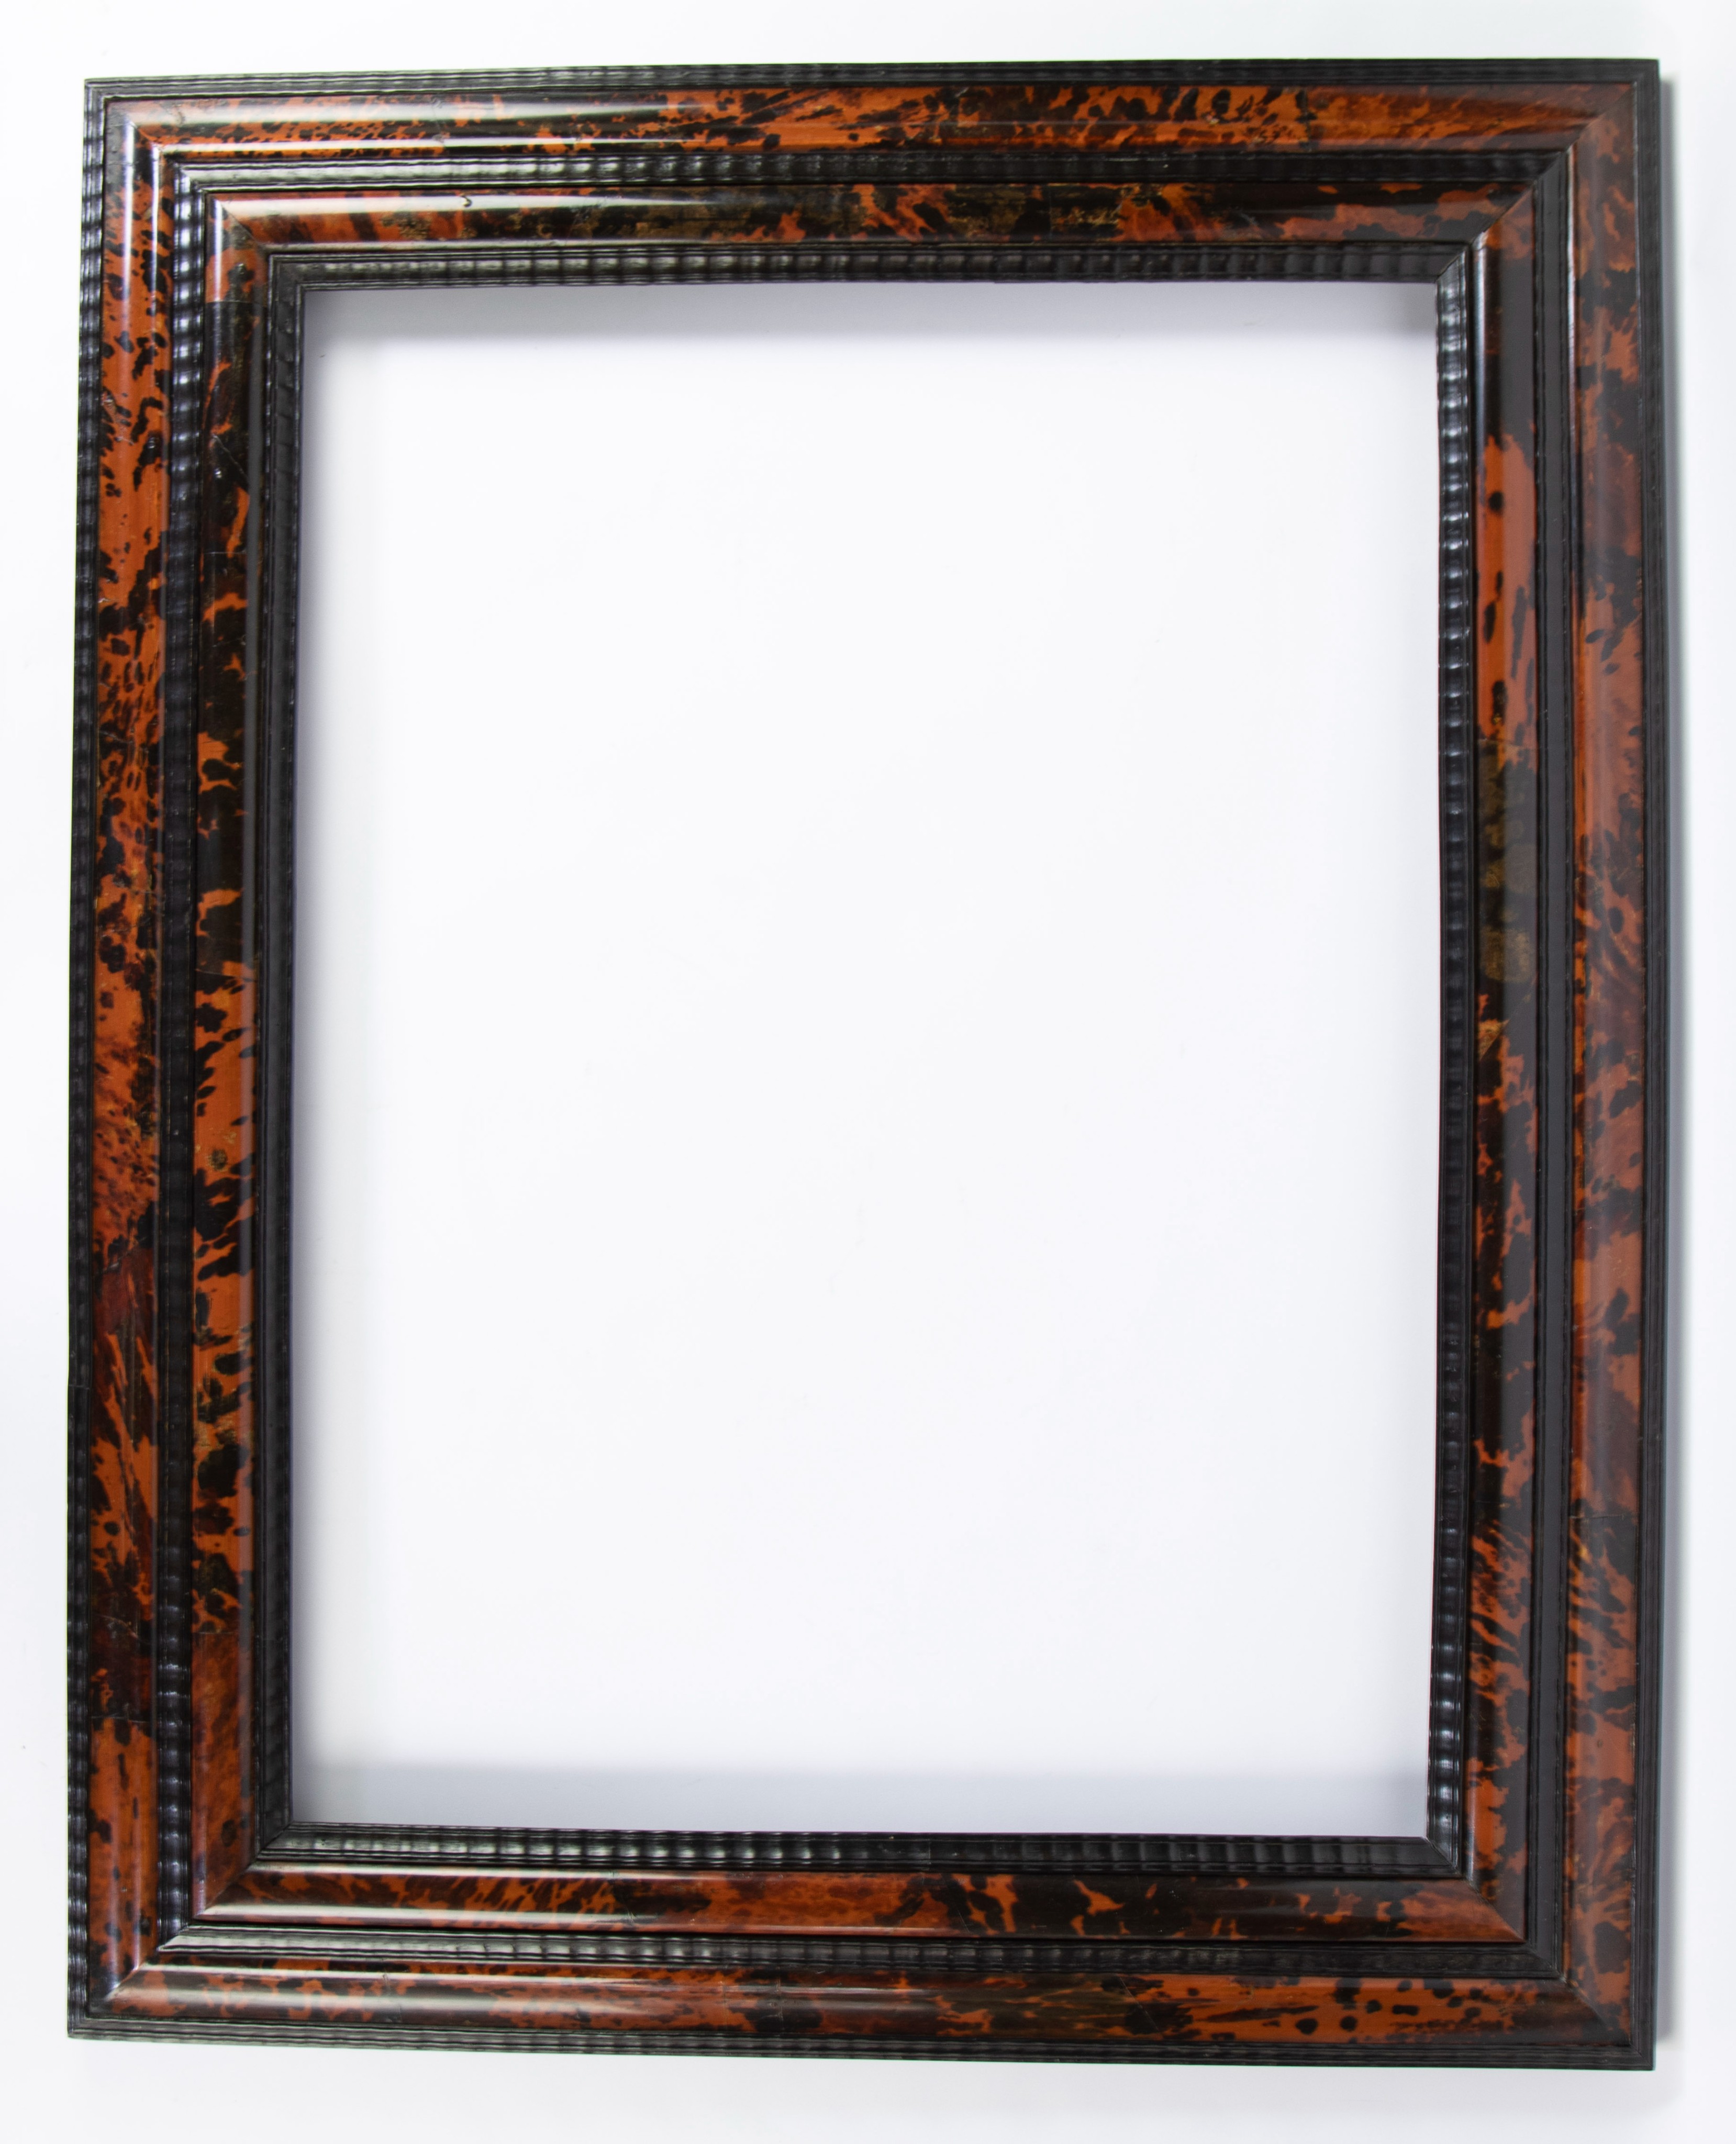 Frame with red tortoiseshell inlaid and ebony rubber moldings.